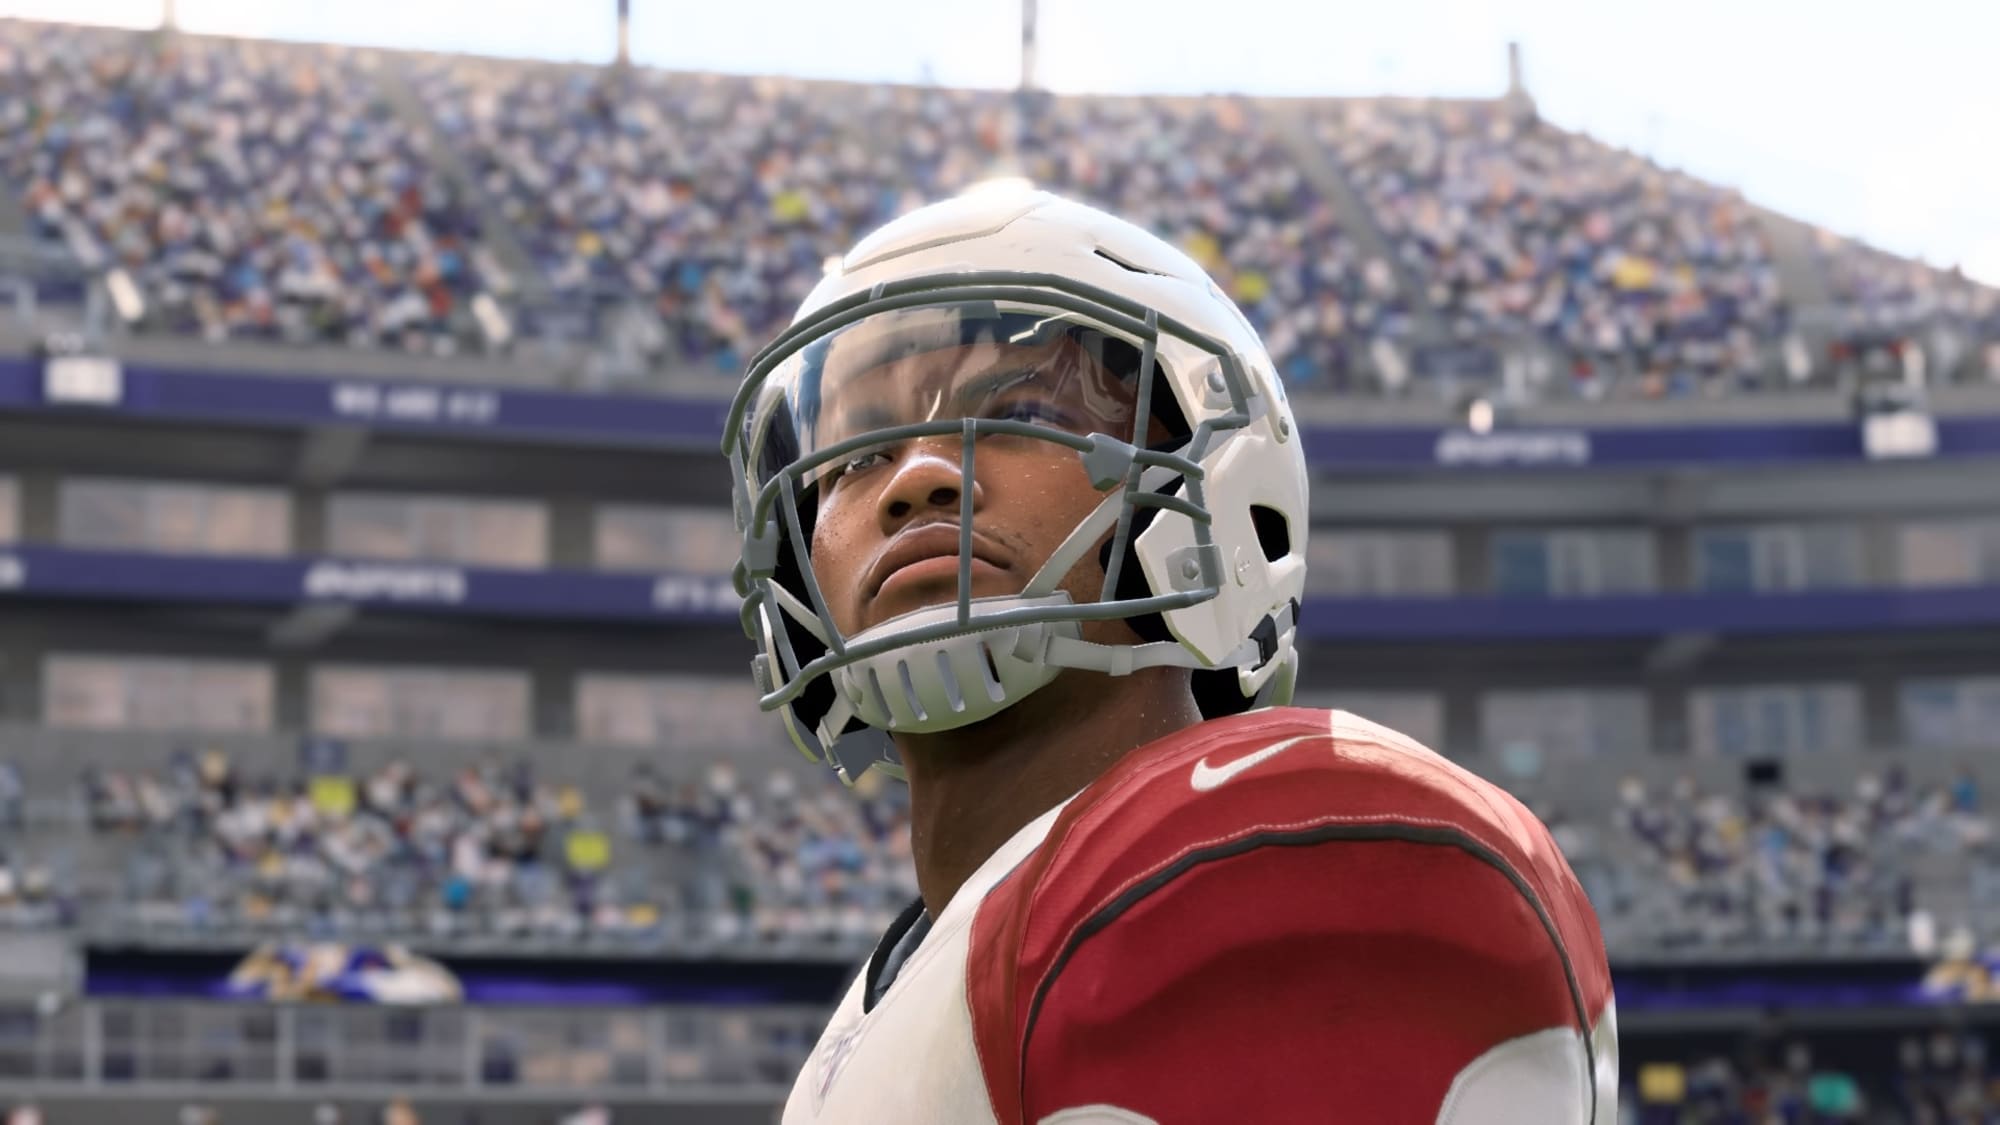 When Will Madden 21 Be Announced